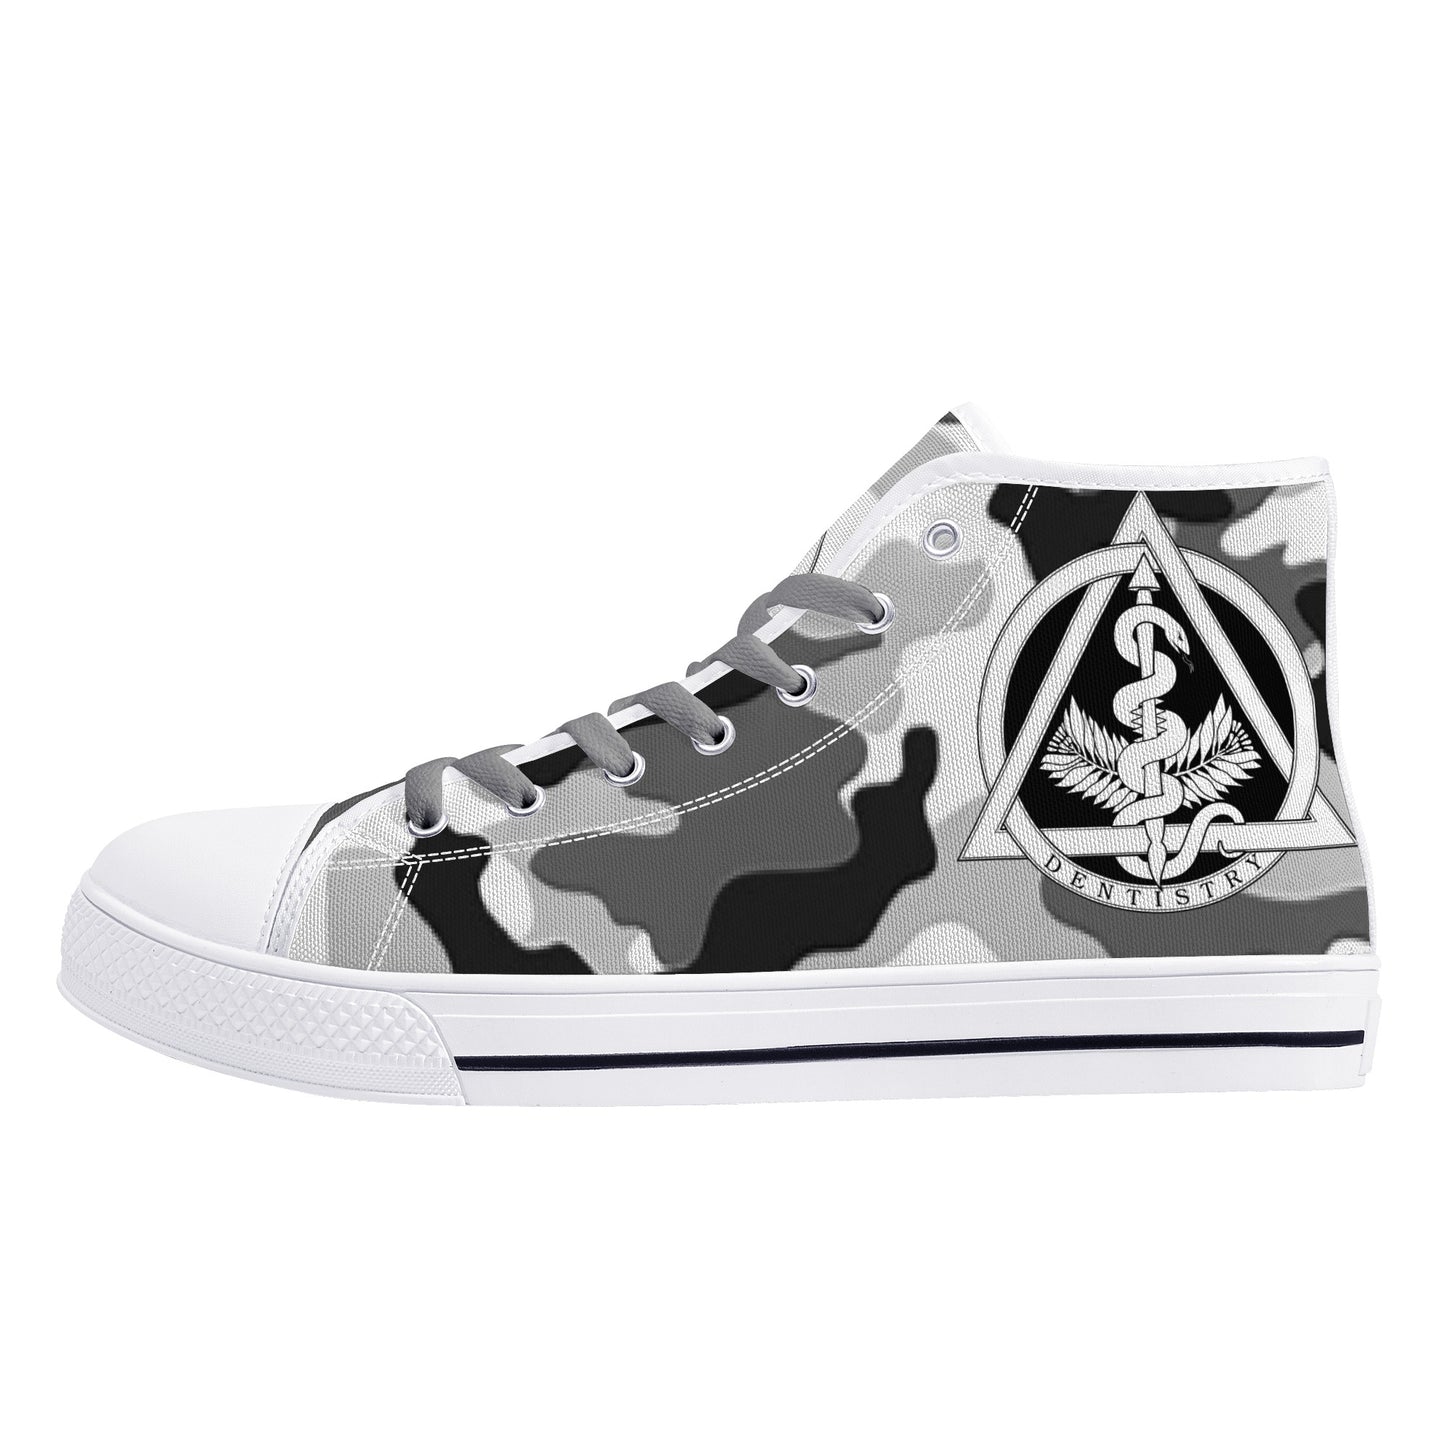 Stand out  with the  Nugget Army Dental Womens High Top Canvas Shoes  available at Hey Nugget. Grab yours today!